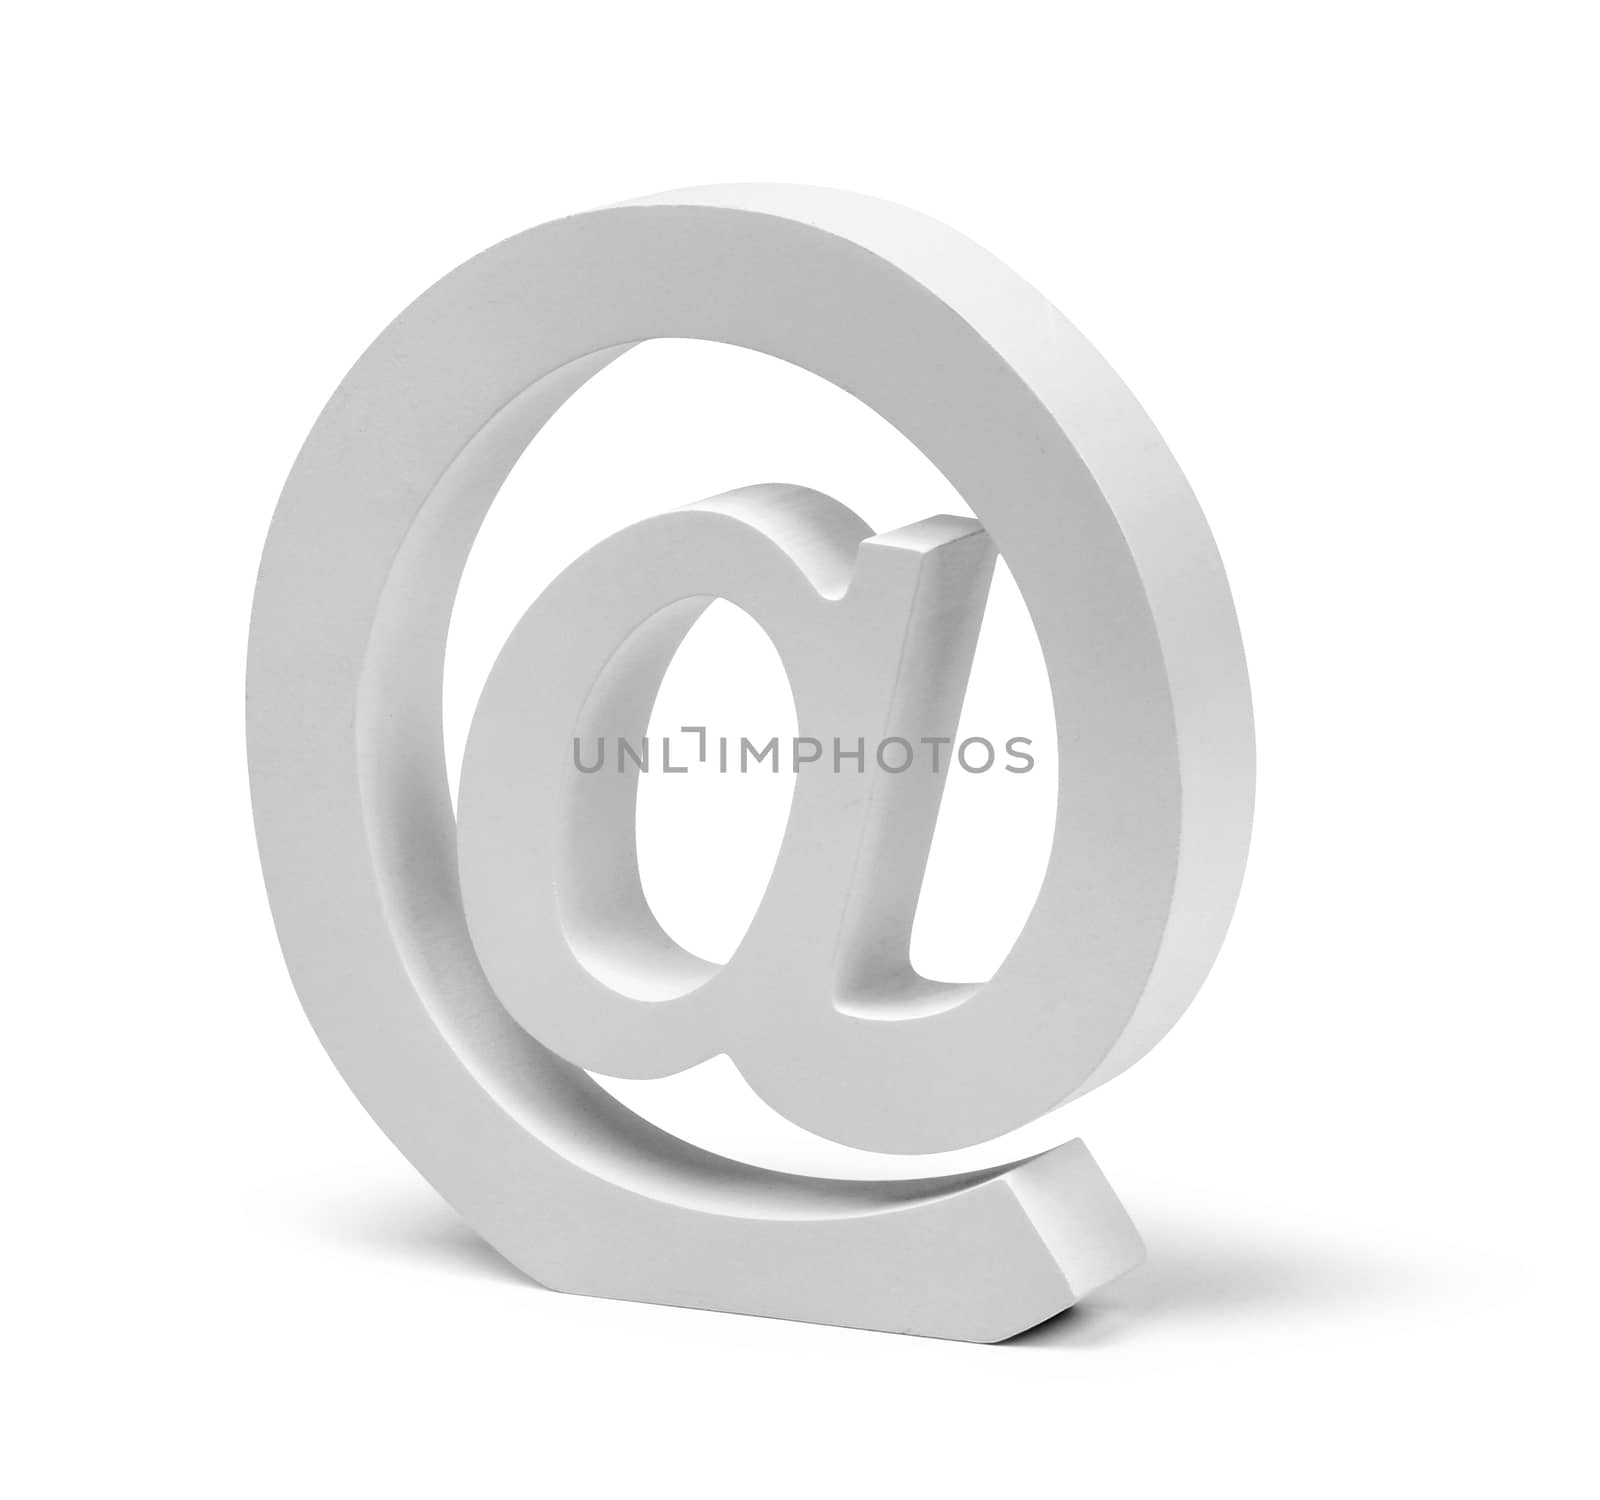 E-mail @ sign symbol isolated by anterovium